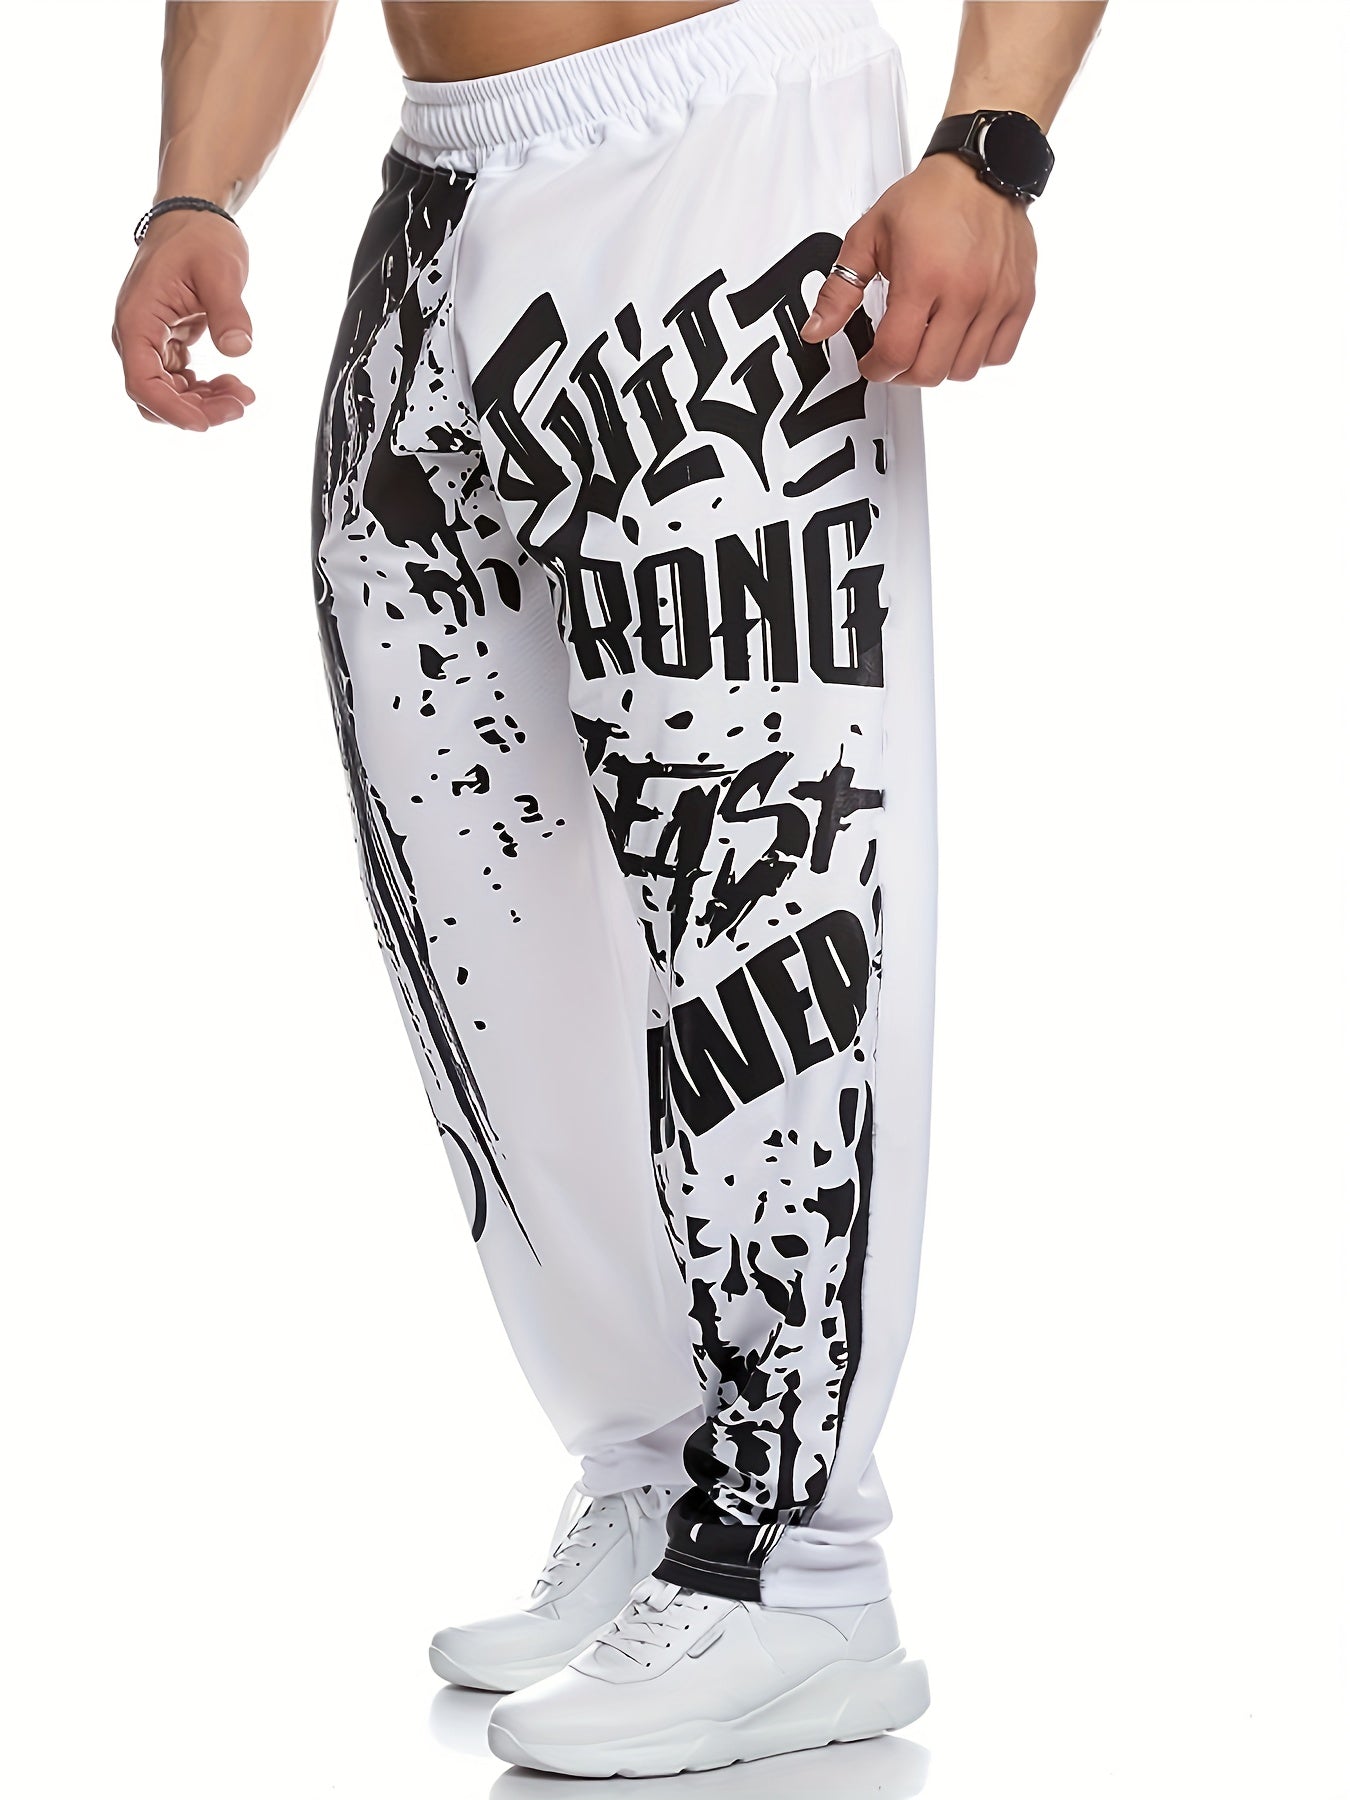 Trendy Loose Fit Printed Joggers, Men's Casual Street Style Stretch Sweatpants For Spring Fall